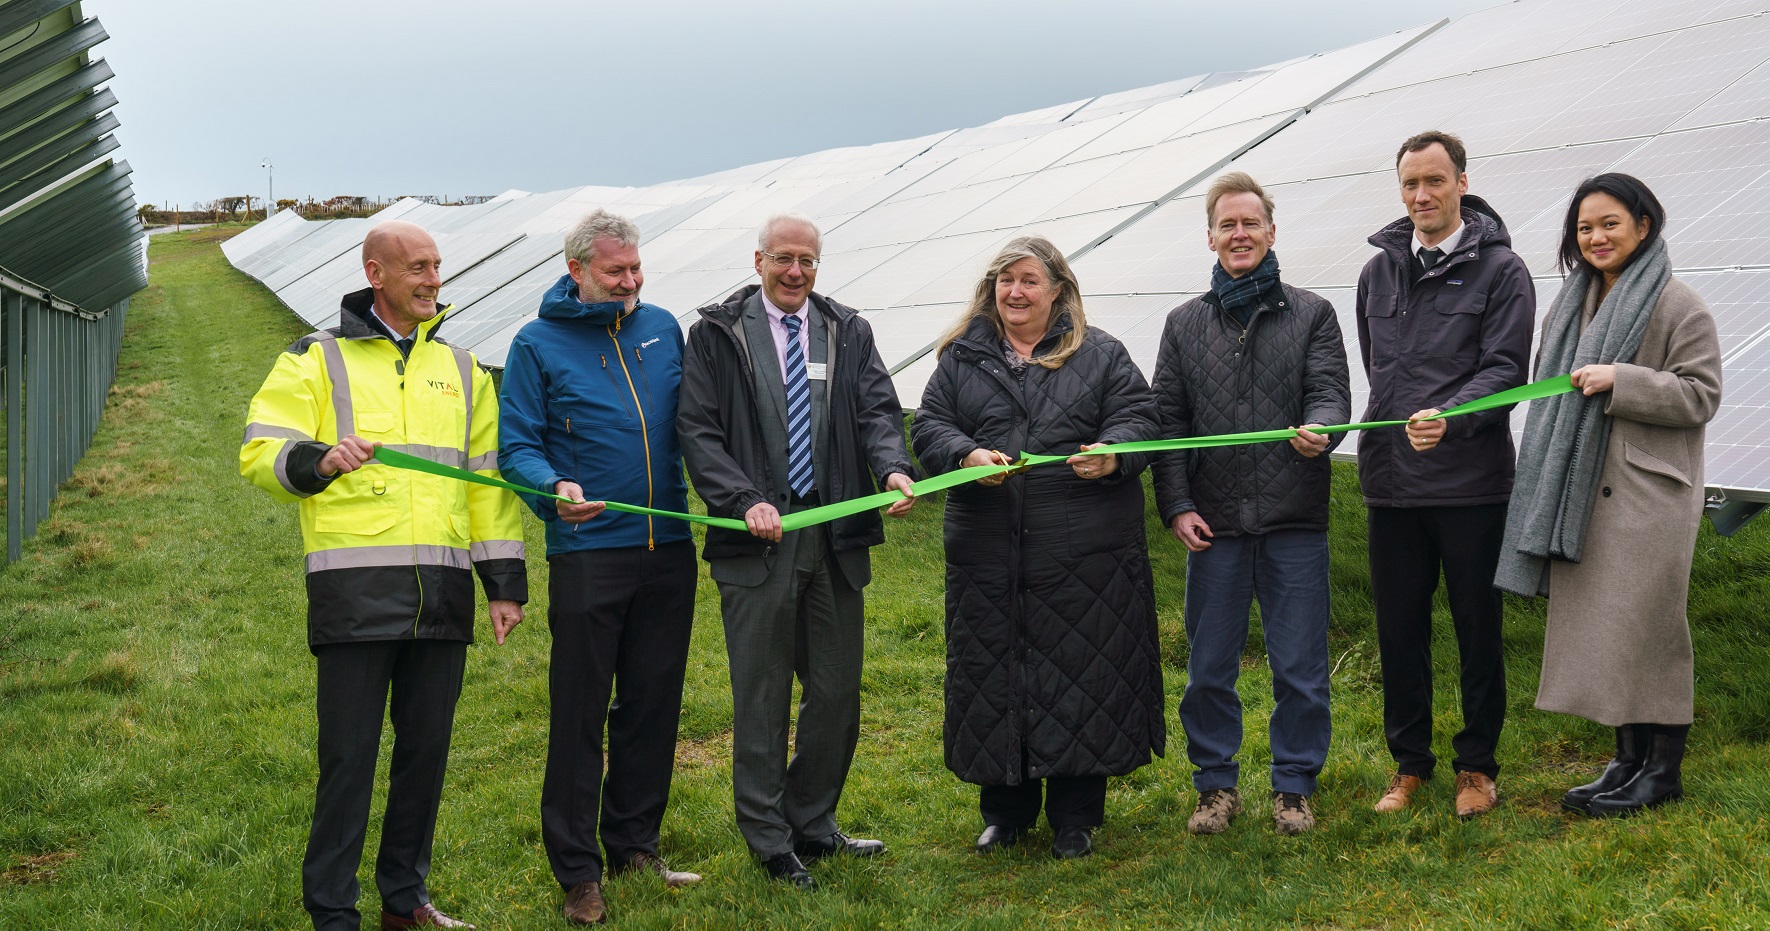 Welsh Government Climate Change Minister Julie James MS (centre), officially opened Aberystwyth University’s new £2.9m solar array. Pictured with the Minister (left to right) are Mark Williams from Vital Energi, Bryan Drysdale from the Welsh Government Energy Service, Professor Neil Glasser, Pro Vice-Chancellor Aberystwyth University, Dr Emyr Roberts, Chair of Aberystwyth University Council, Dewi Day, Sustainability Advisor at Aberystwyth University and Joan Dayap, Salix Finance.